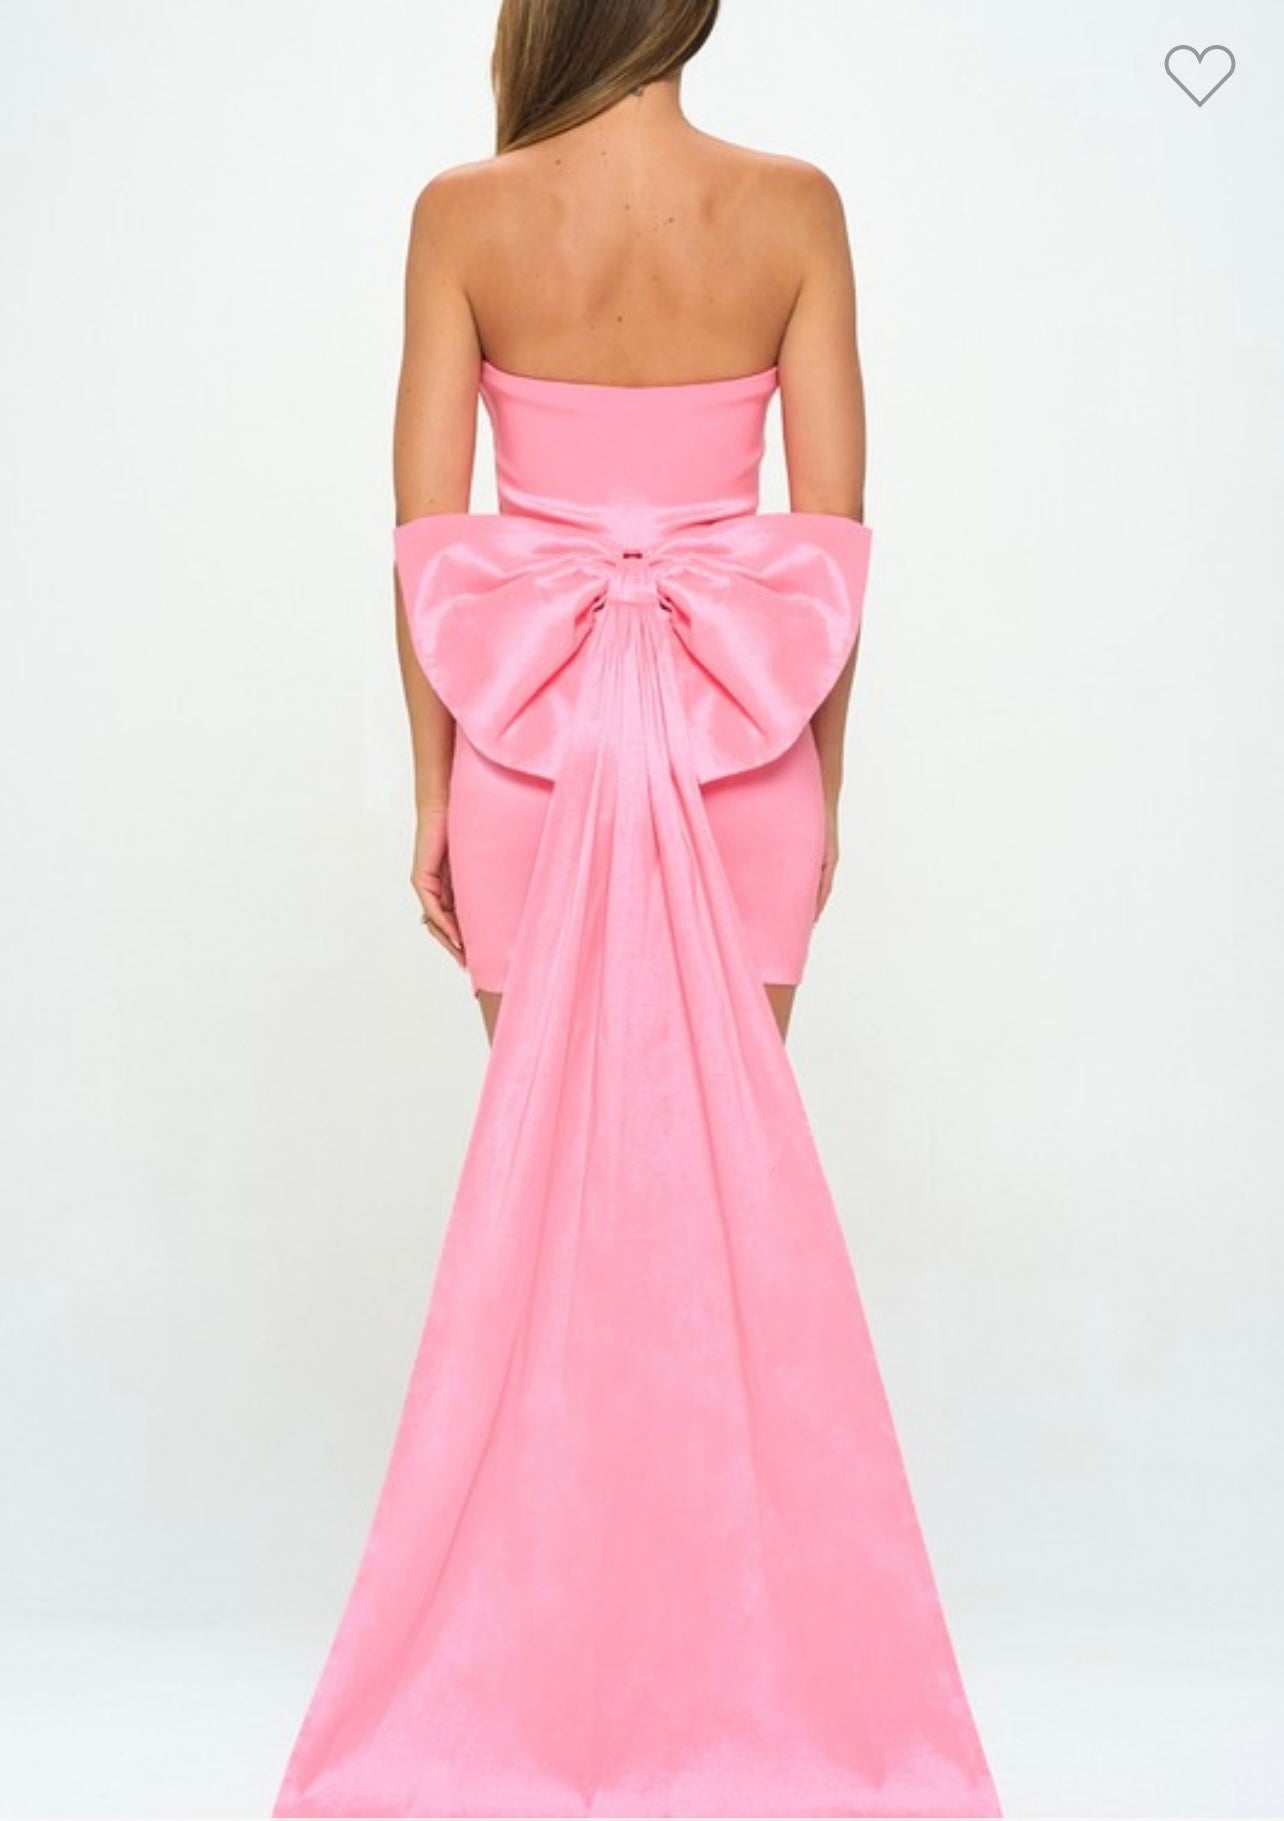 Baby Pink Bow Train Dress